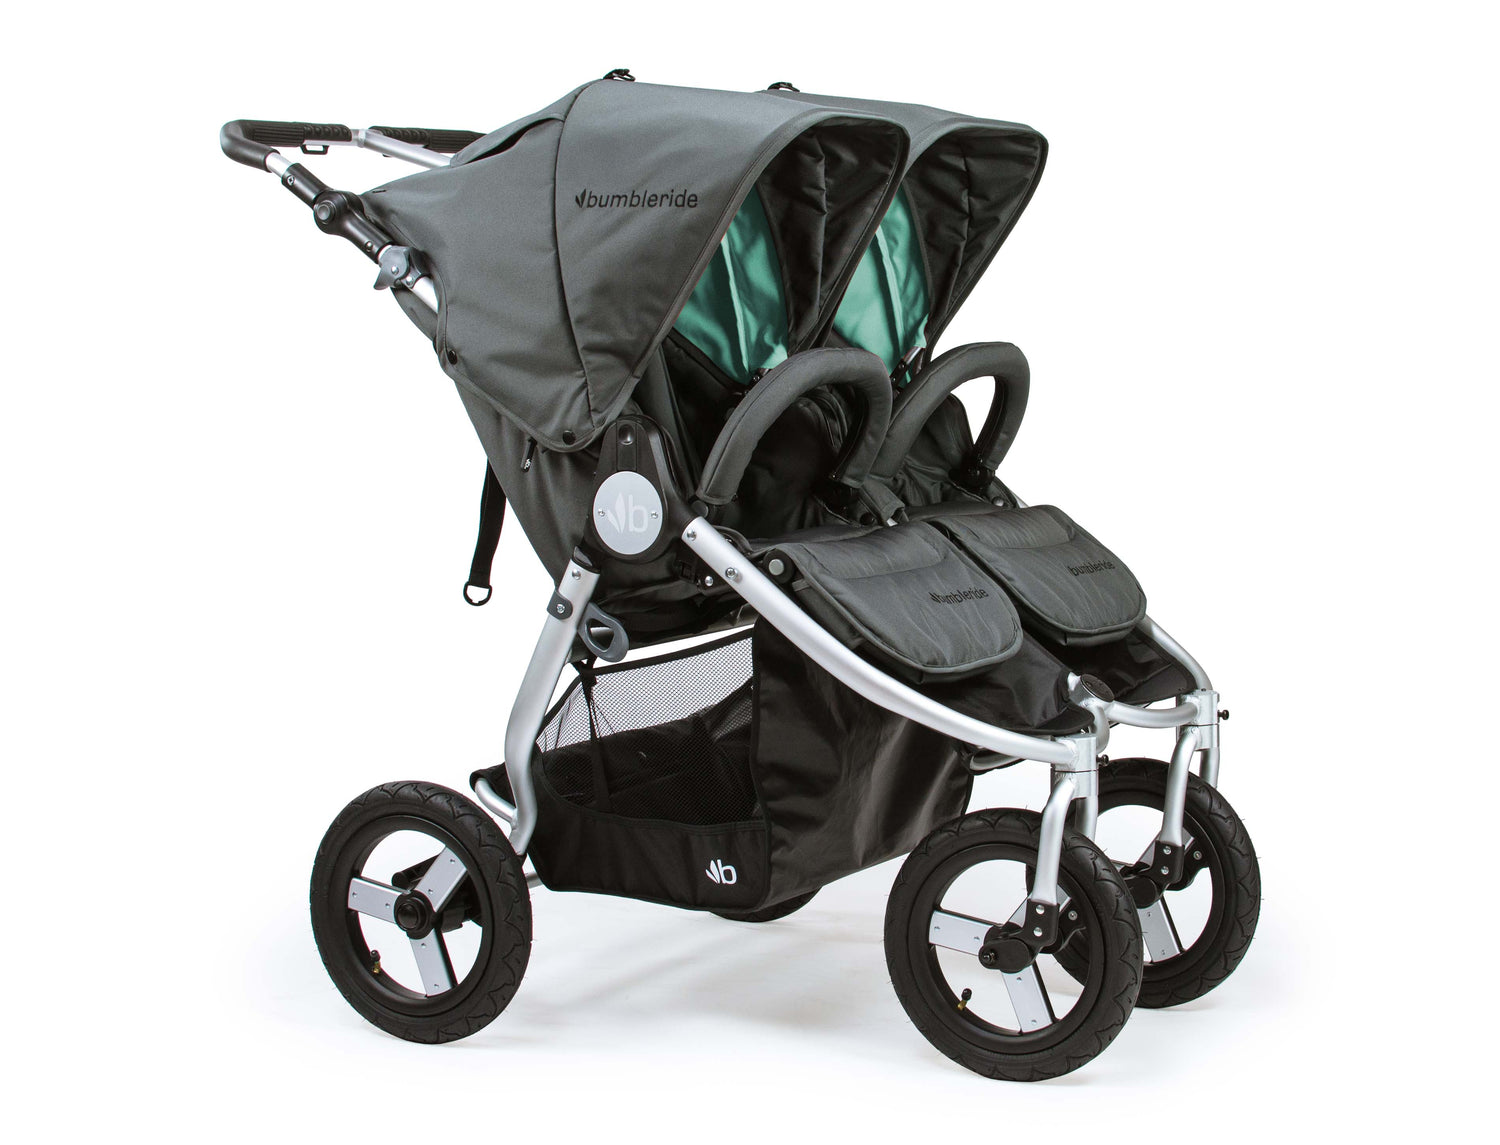 baby jogger city select second seat amethyst